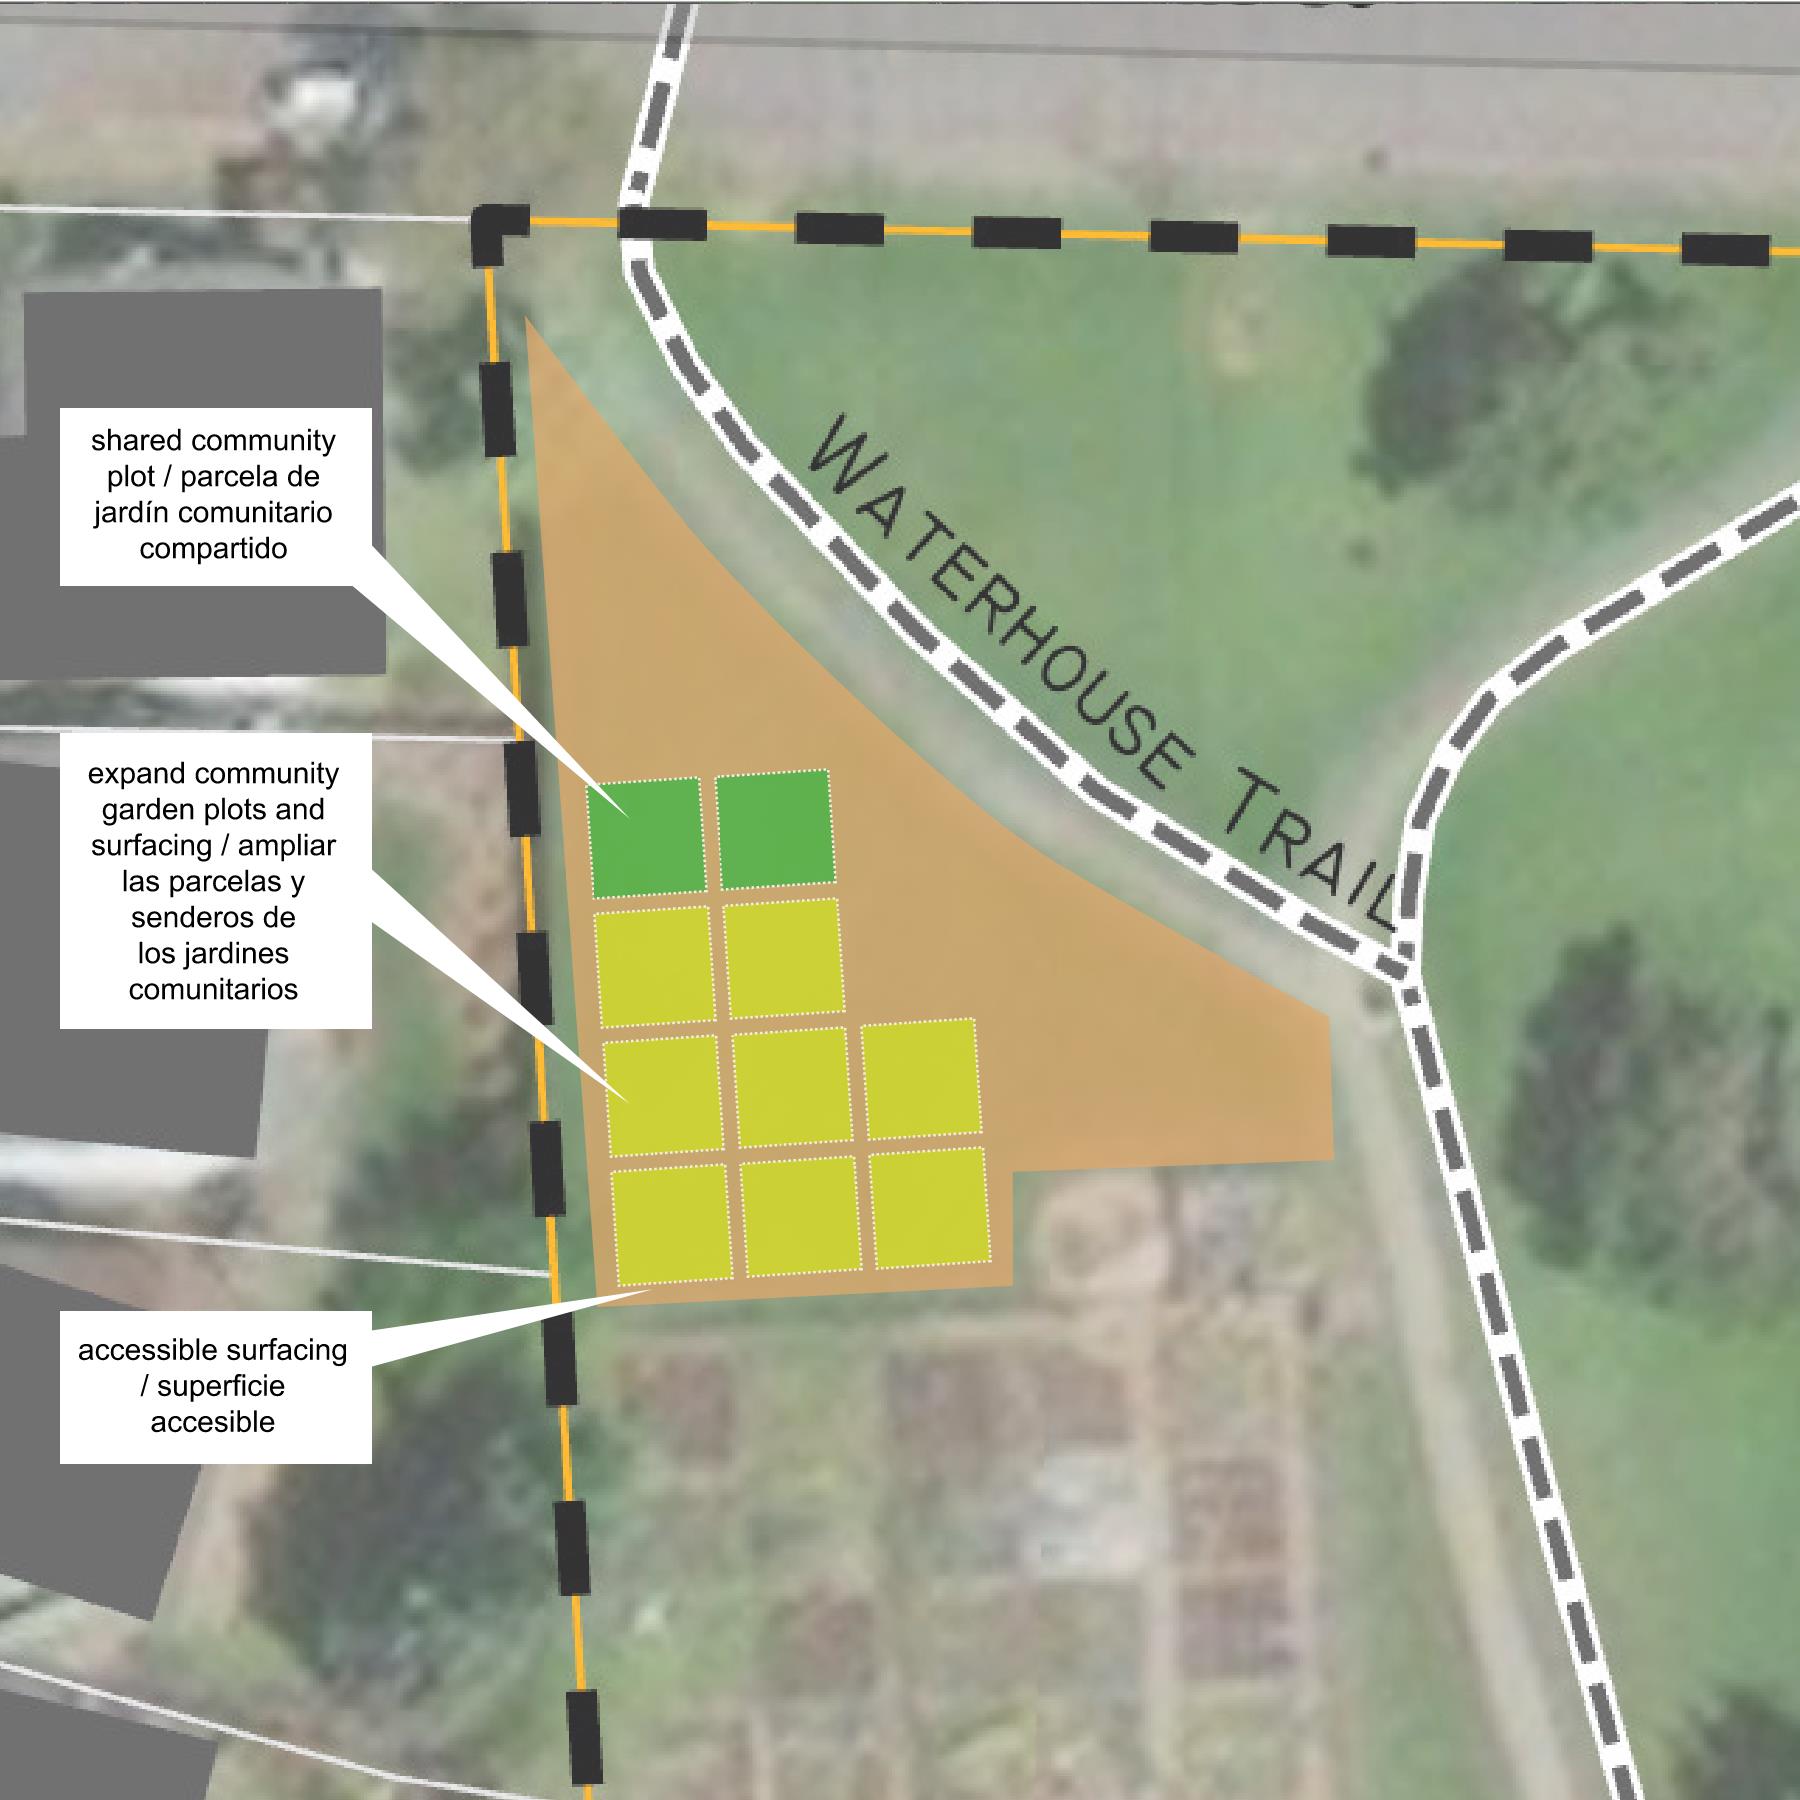 Image alt text: John Marty Park is a powerline park that currently hosts a community garden. This proposal is to expand the gardens by utilizing more of the unused space under the powerlines. The expansion will connect the existing community garden at the northern end of the park near NW Charlais St. ADA accessibility improvements ill be made within the expanded garden along with a new ADA parking space.